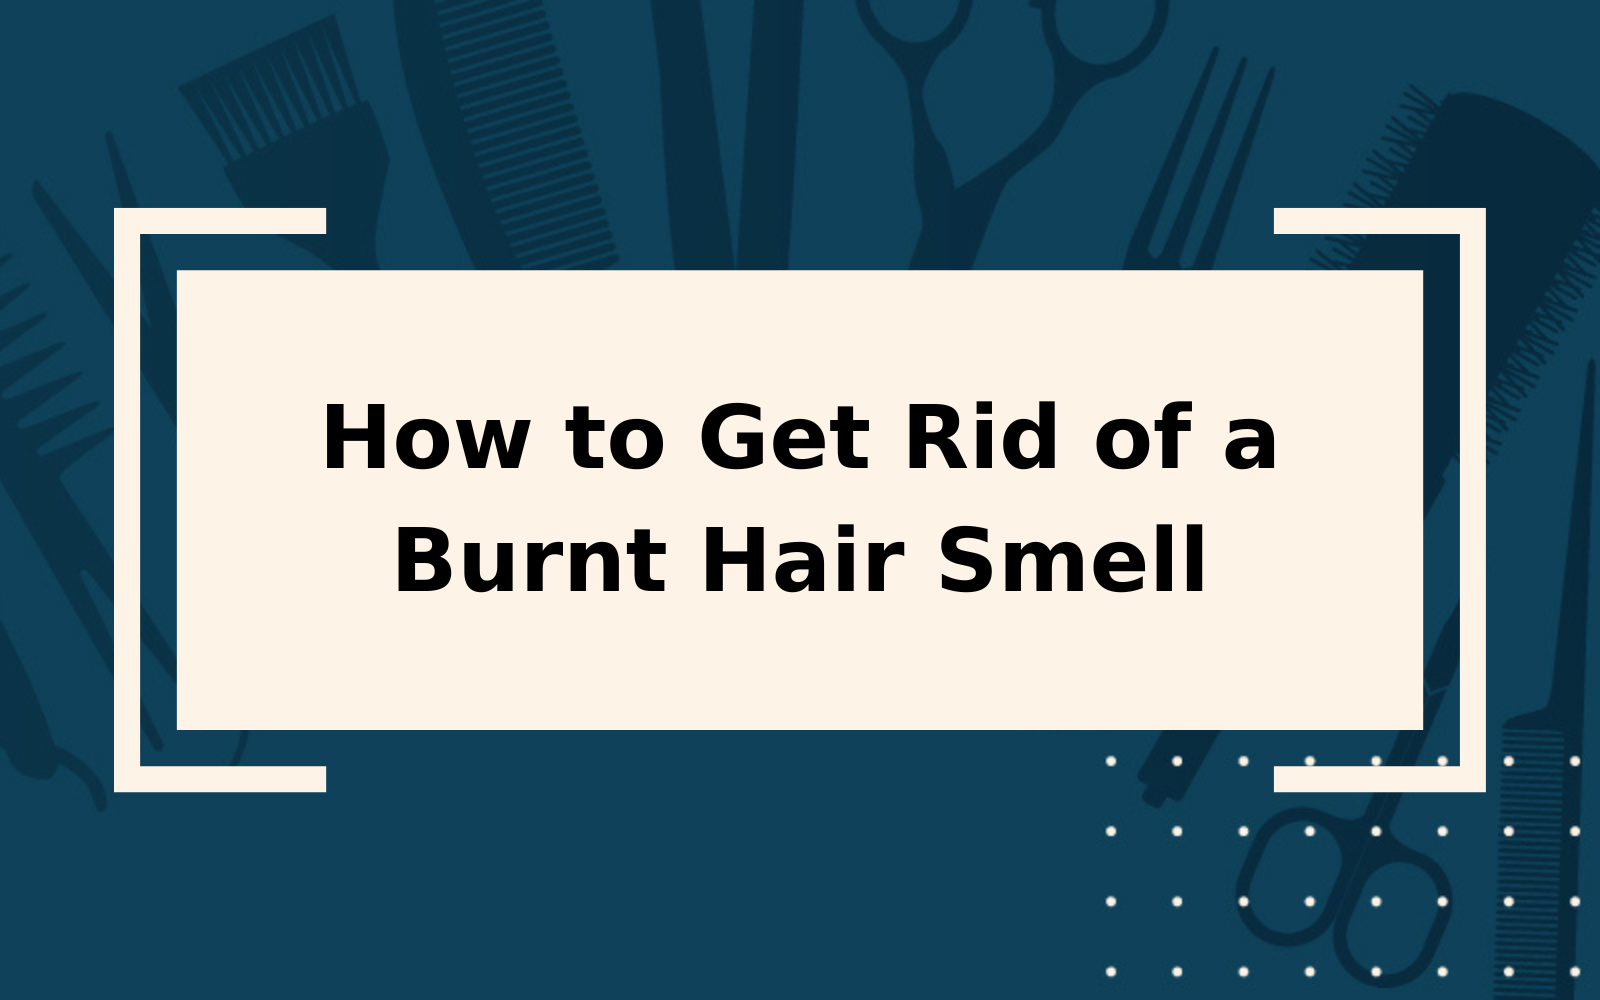 How to Get Rid of Burnt Hair Smell | 7 Ways